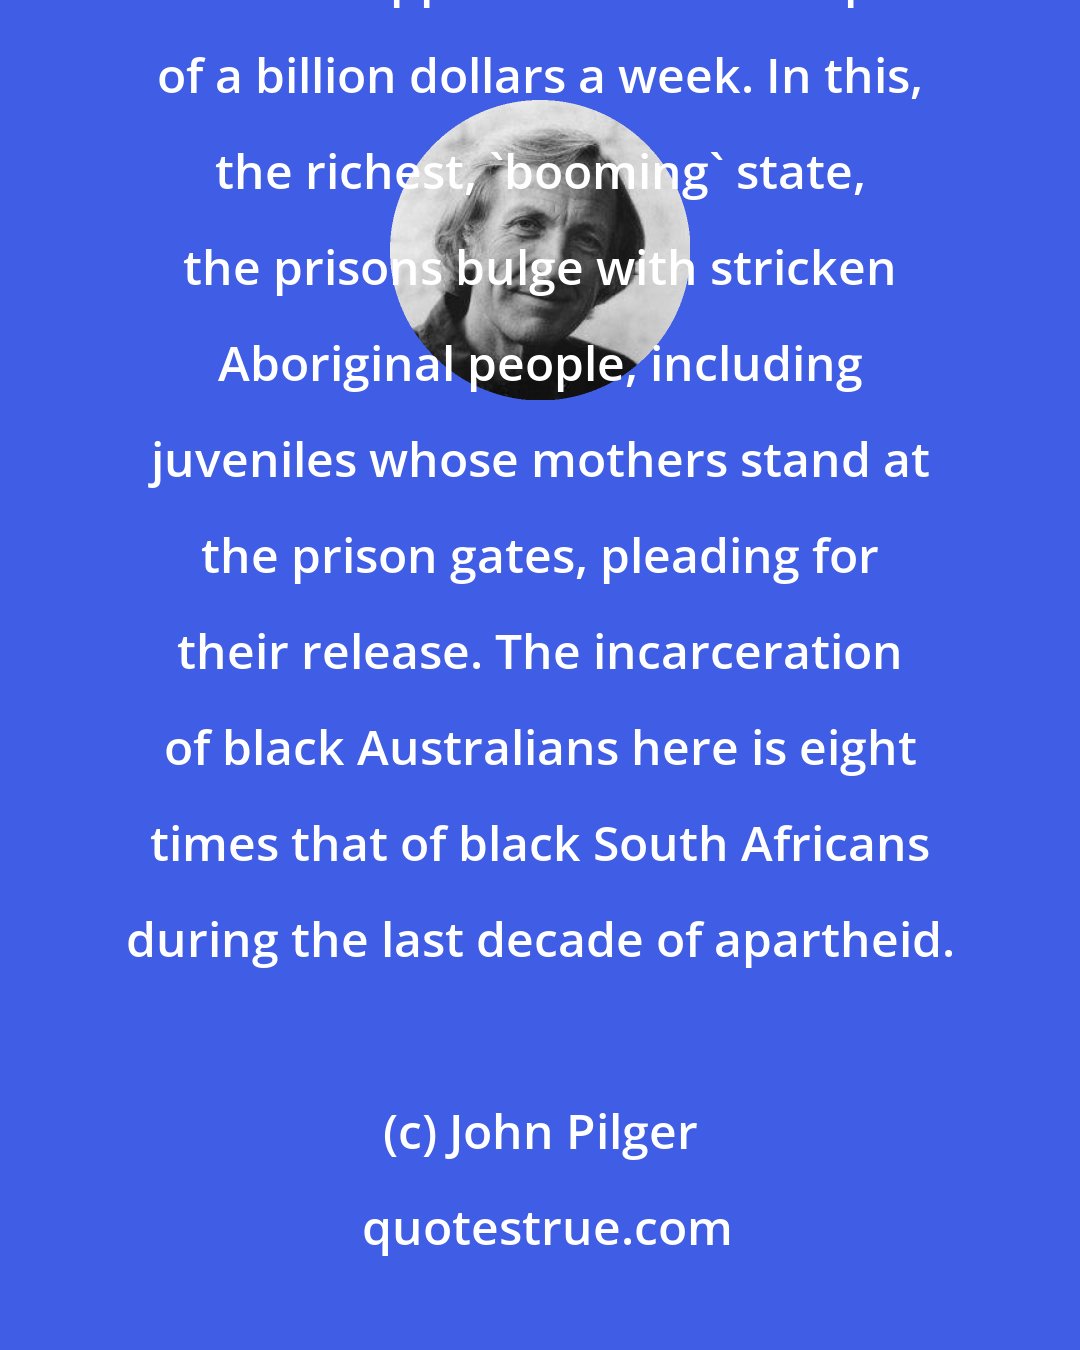 John Pilger: In Western Australia, minerals are being dug up from Aboriginal land and shipped to China for a profit of a billion dollars a week. In this, the richest, 'booming' state, the prisons bulge with stricken Aboriginal people, including juveniles whose mothers stand at the prison gates, pleading for their release. The incarceration of black Australians here is eight times that of black South Africans during the last decade of apartheid.